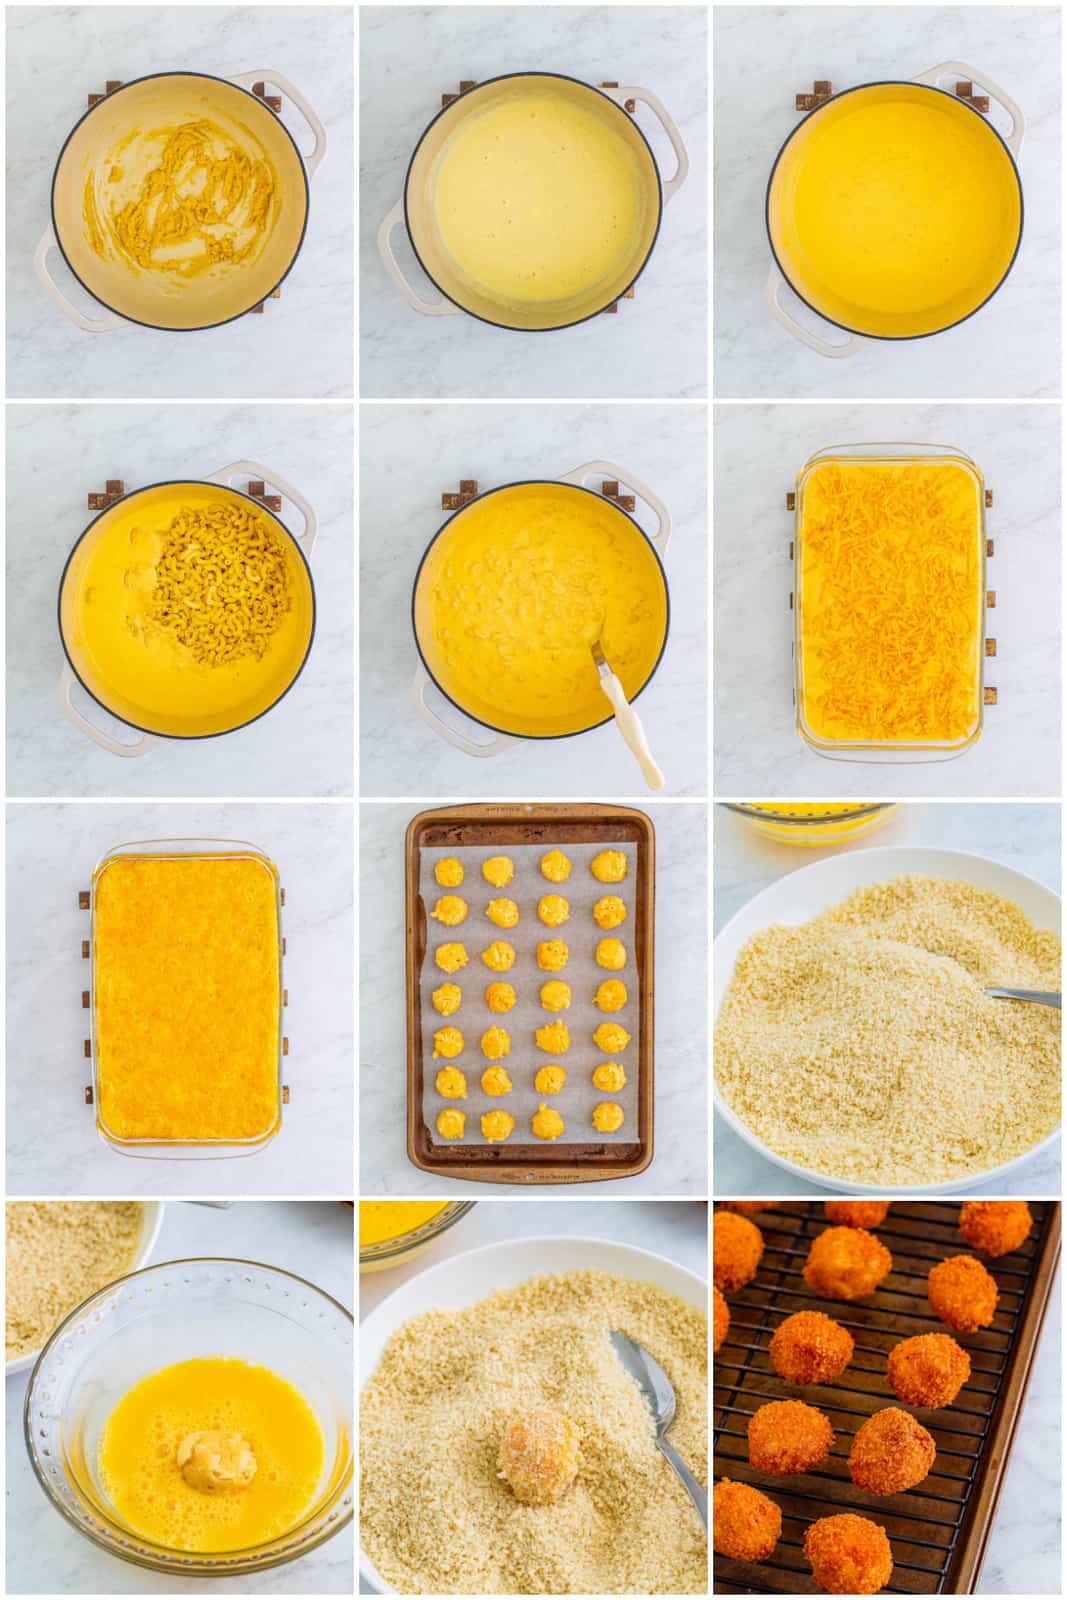 Step by step photos on how to make Fried Mac and Cheese.